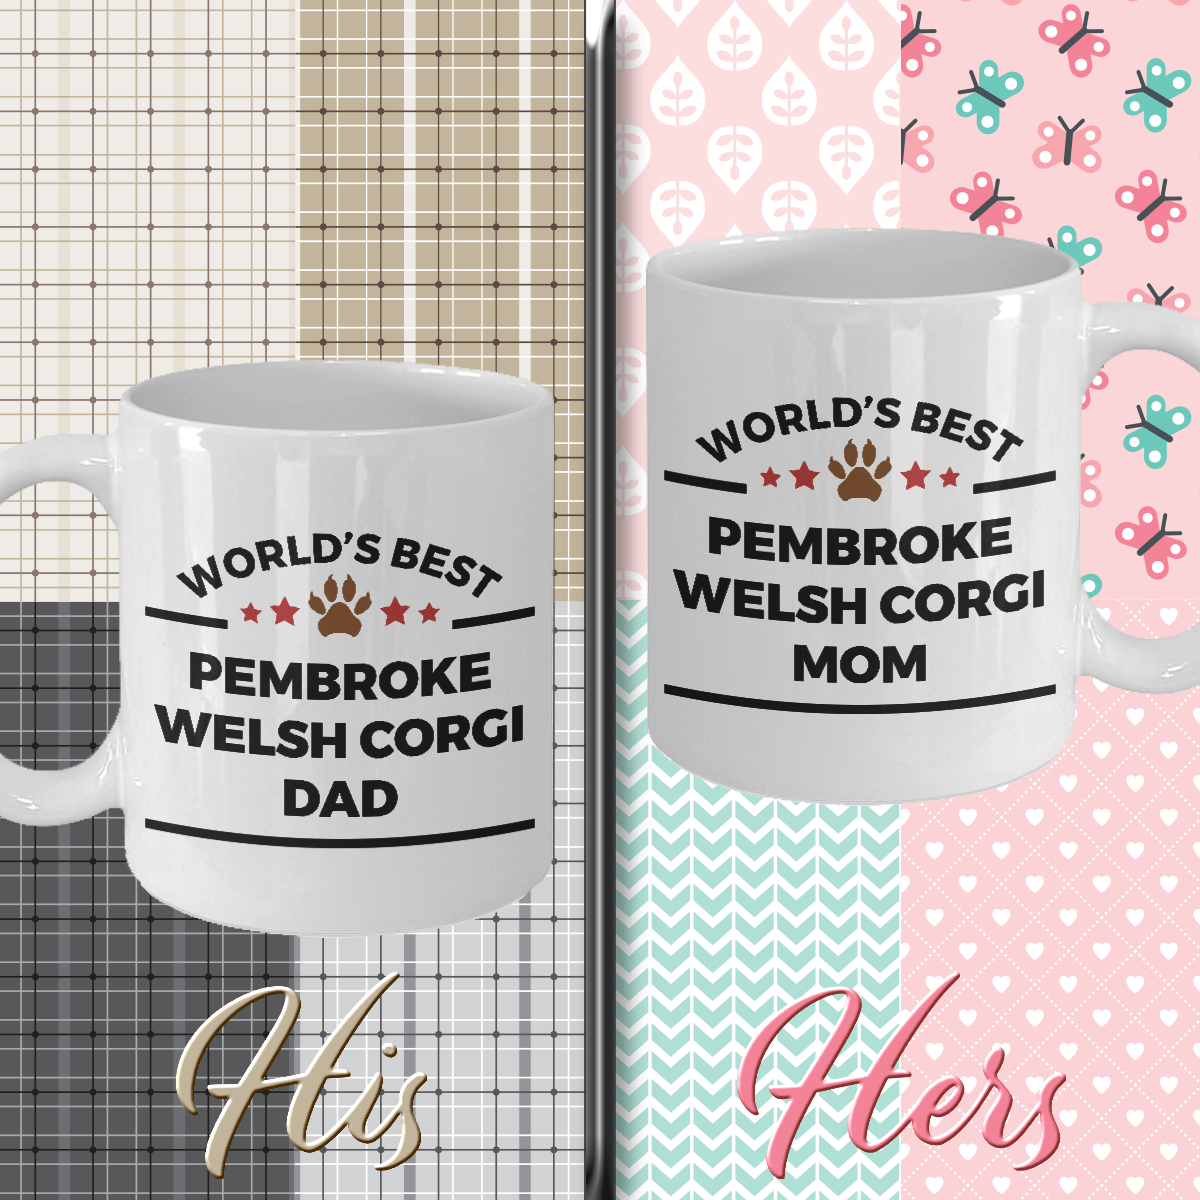 Pembroke Welsh Corgi Dog Dad and Mom Couples Set of 2 His and Hers